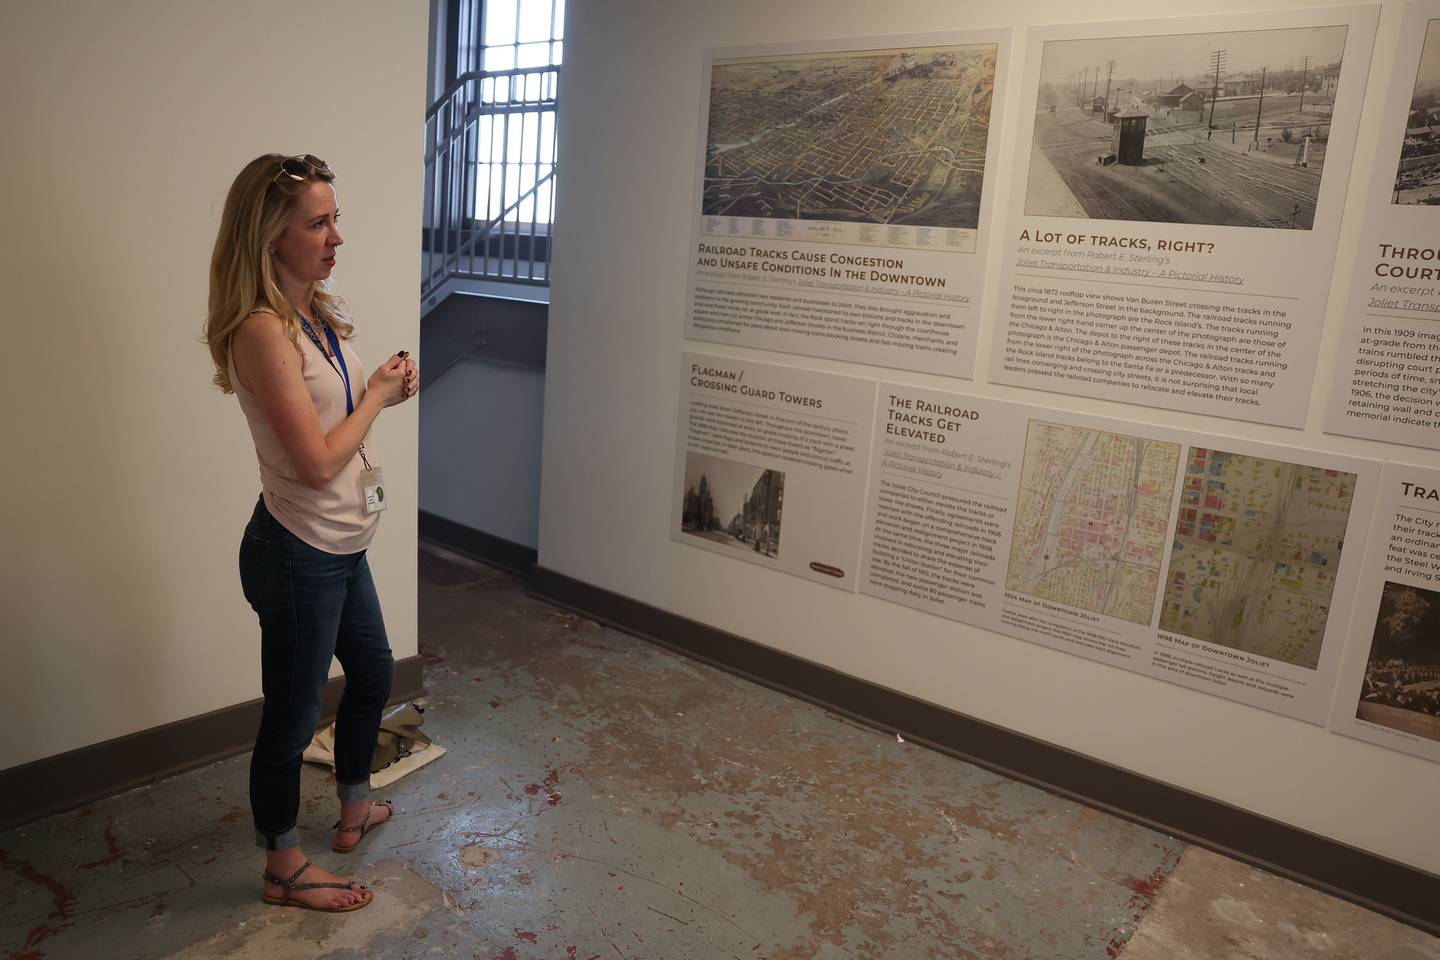 Jayne Bernhard, Joliet City Planner, gives a tour of train museum in the Old Union Depot Tower at the Joliet Gateway Center station on Thursday, May 11, 2023 in Joliet.